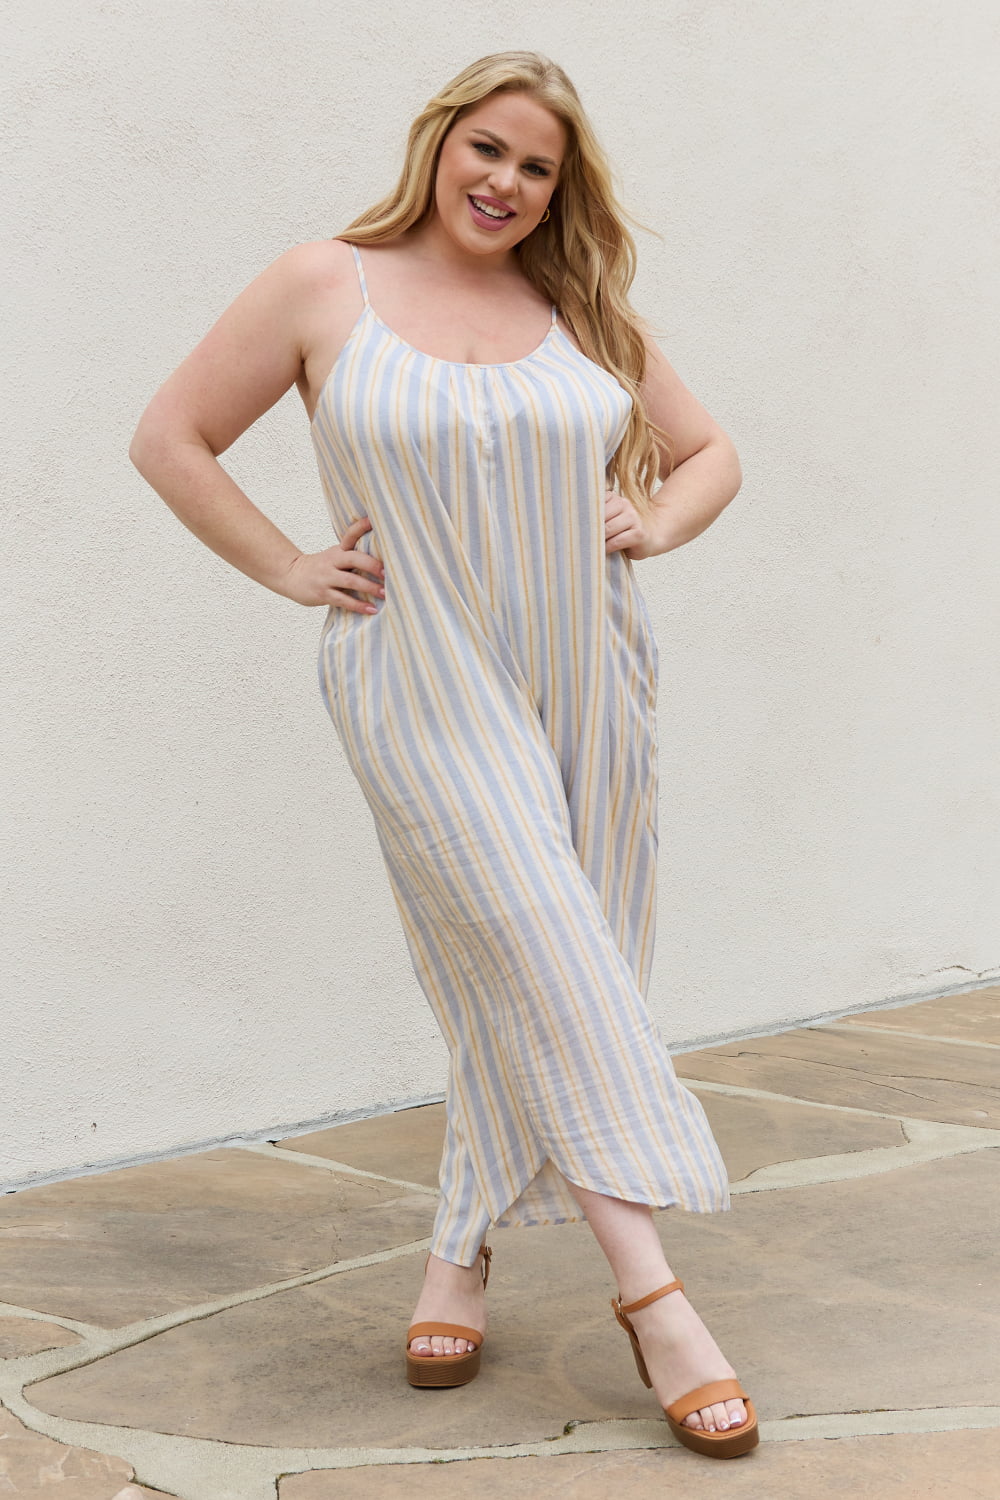 HEYSON Full Size Multi Colored Striped Jumpsuit with Pockets  Sunset and Swim   